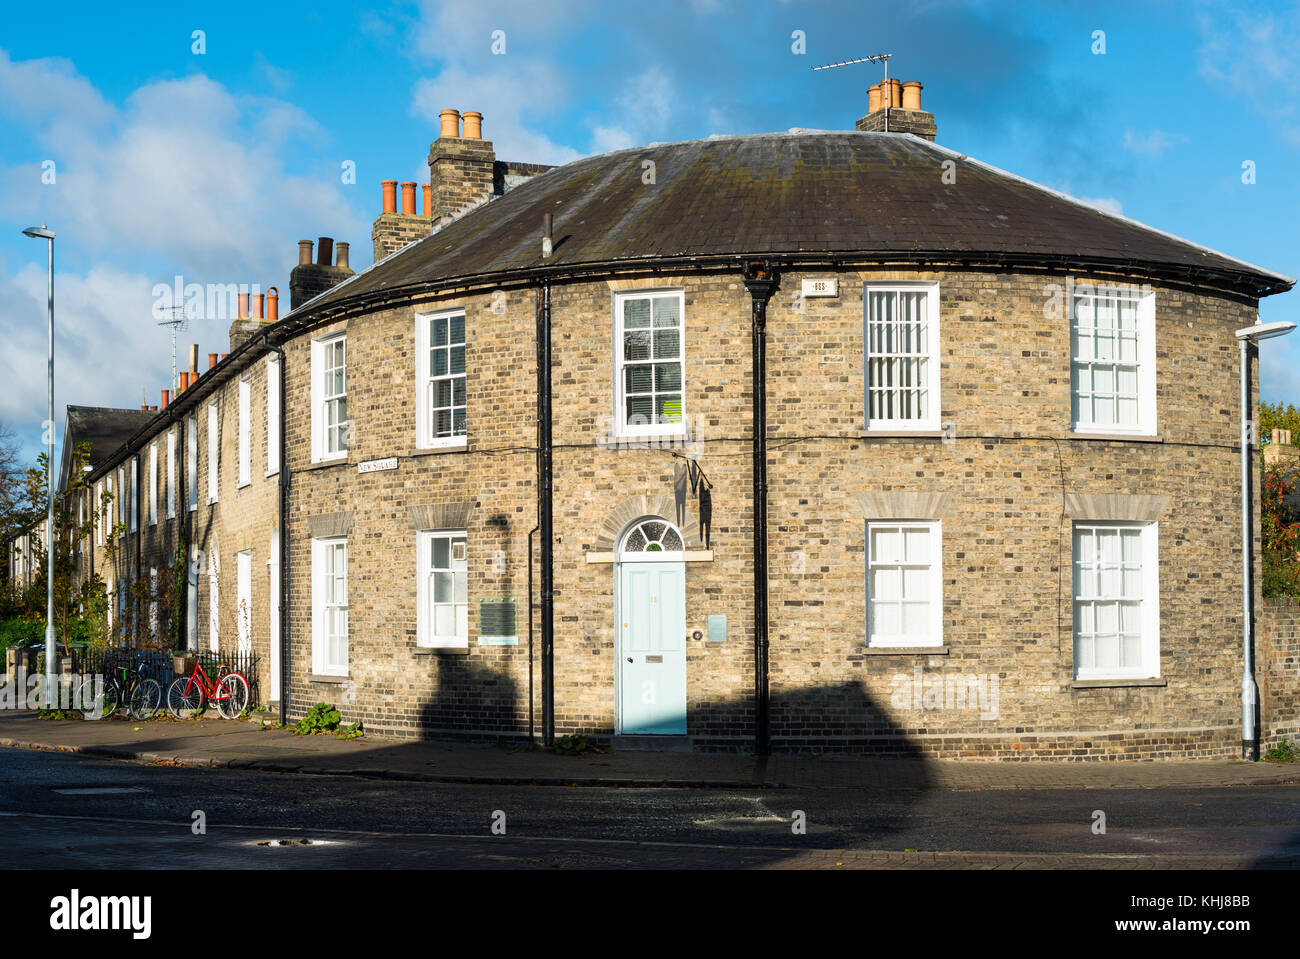 Victorian terrace ending with a curved house on New Square, Cambridge city centre, Cambridgeshire, England, UK. Stock Photo